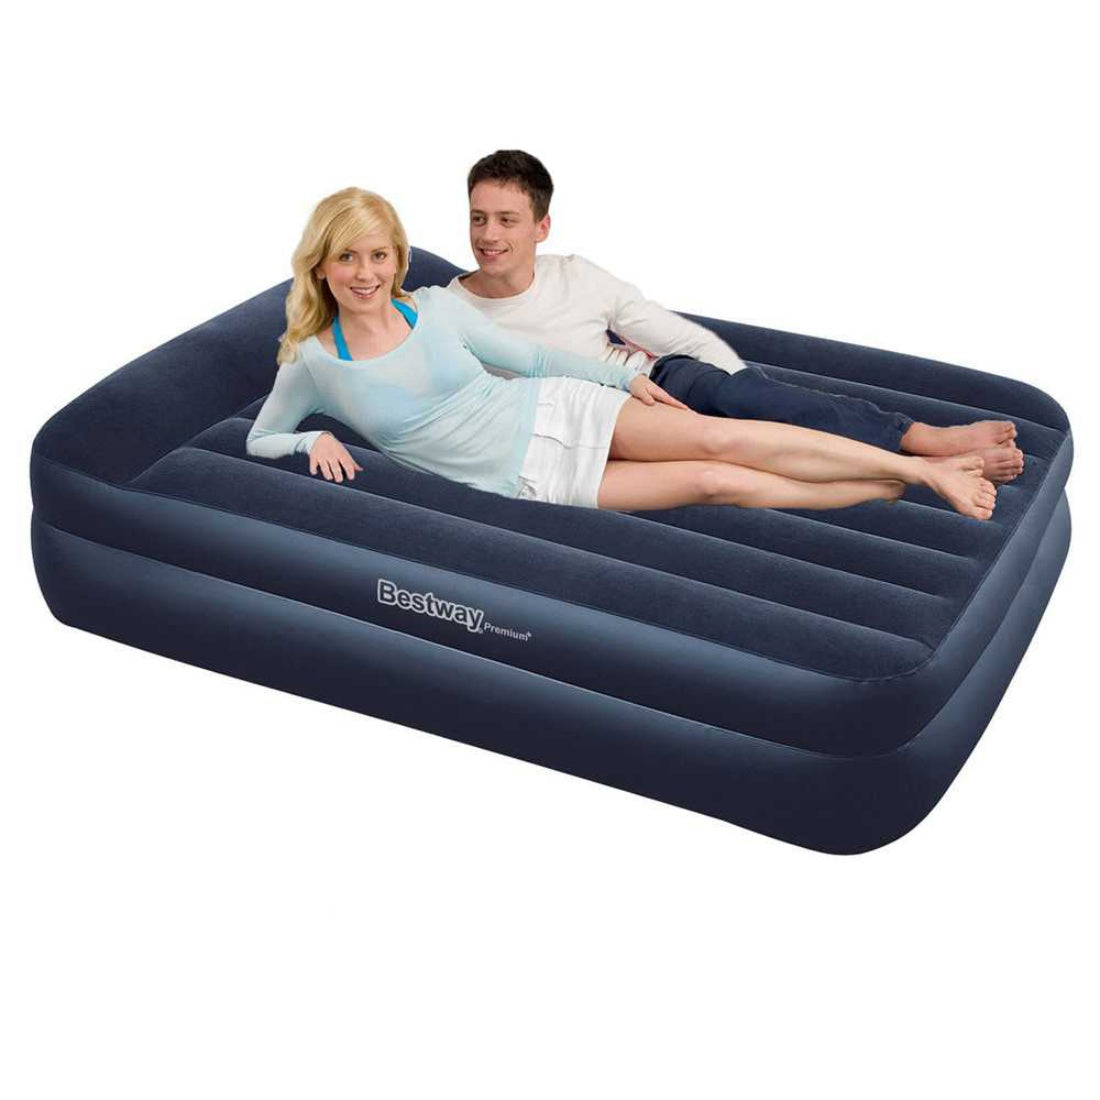 Bestway Luxury Air Bed Queen Size Inflatable Mattress Electric Pump